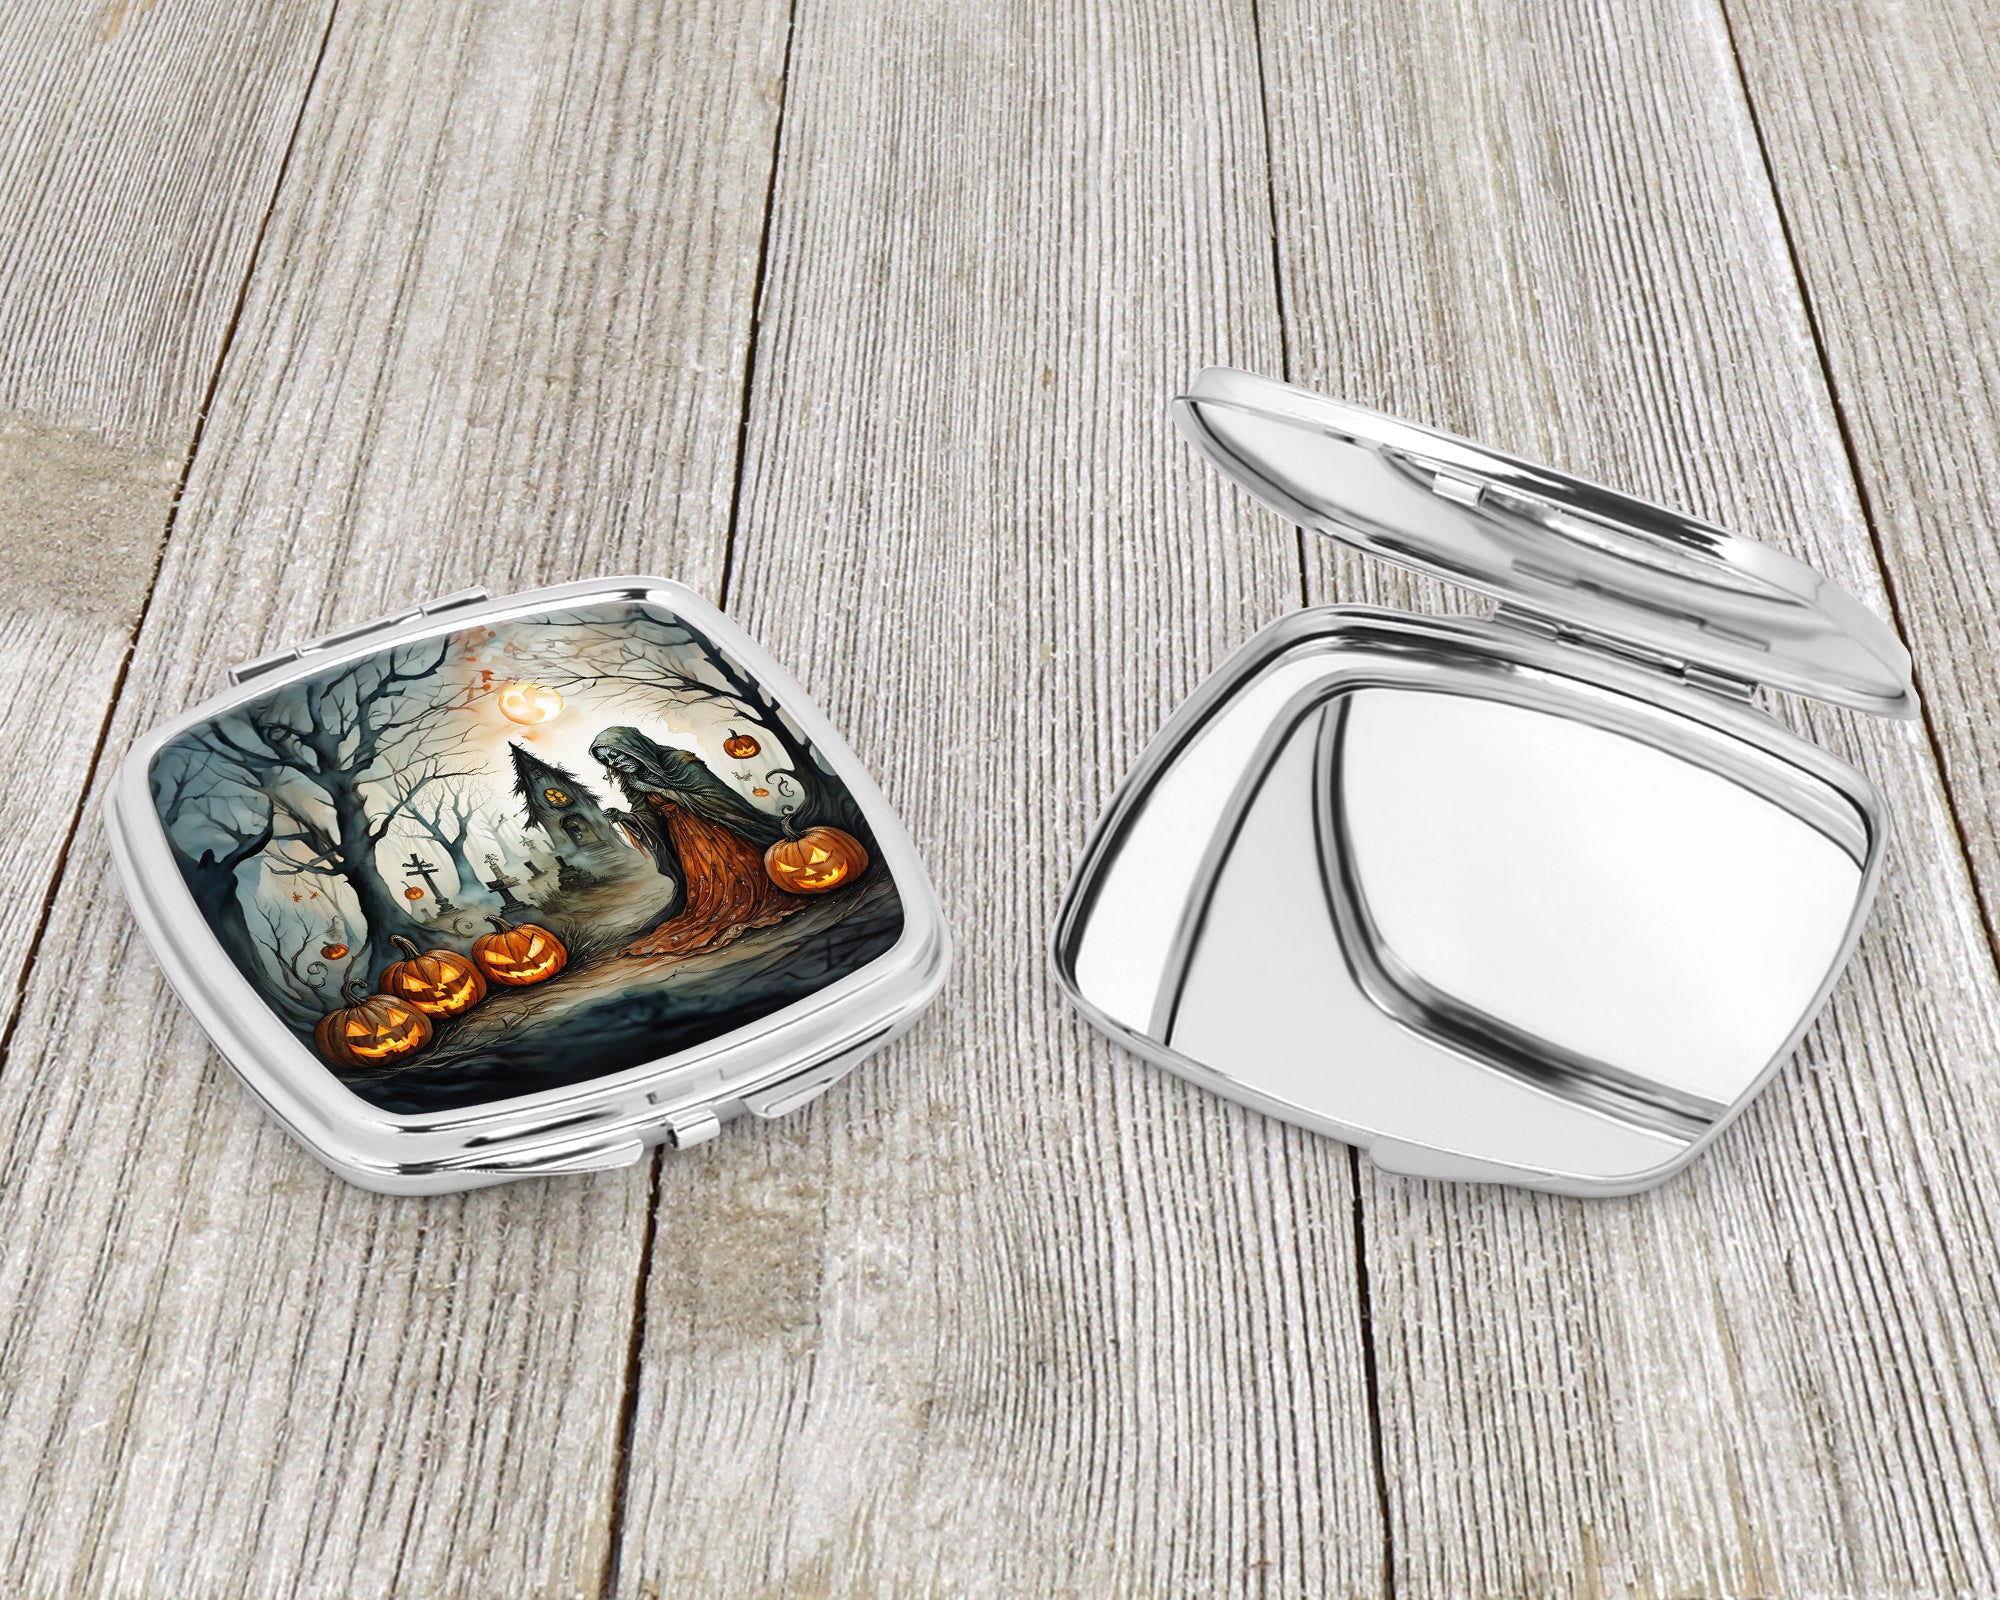 The Weeping Woman Spooky Halloween Compact Mirror